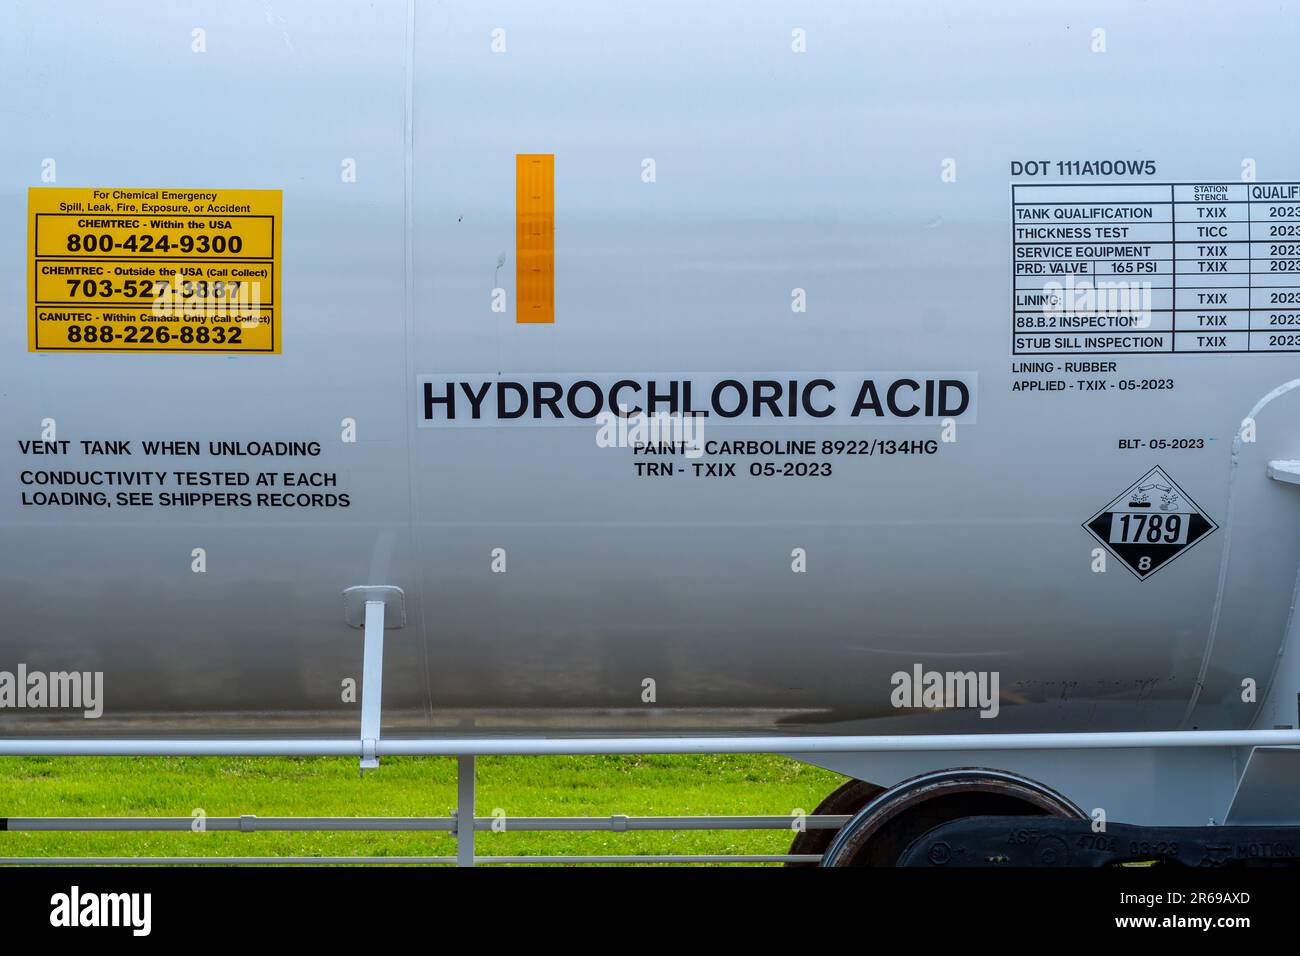 NEW ORLEANS, LA, USA - JUNE 5, 2023: Exterior of railway tank car containing hydrochloric acid with emergency information and warning sign Stock Photo